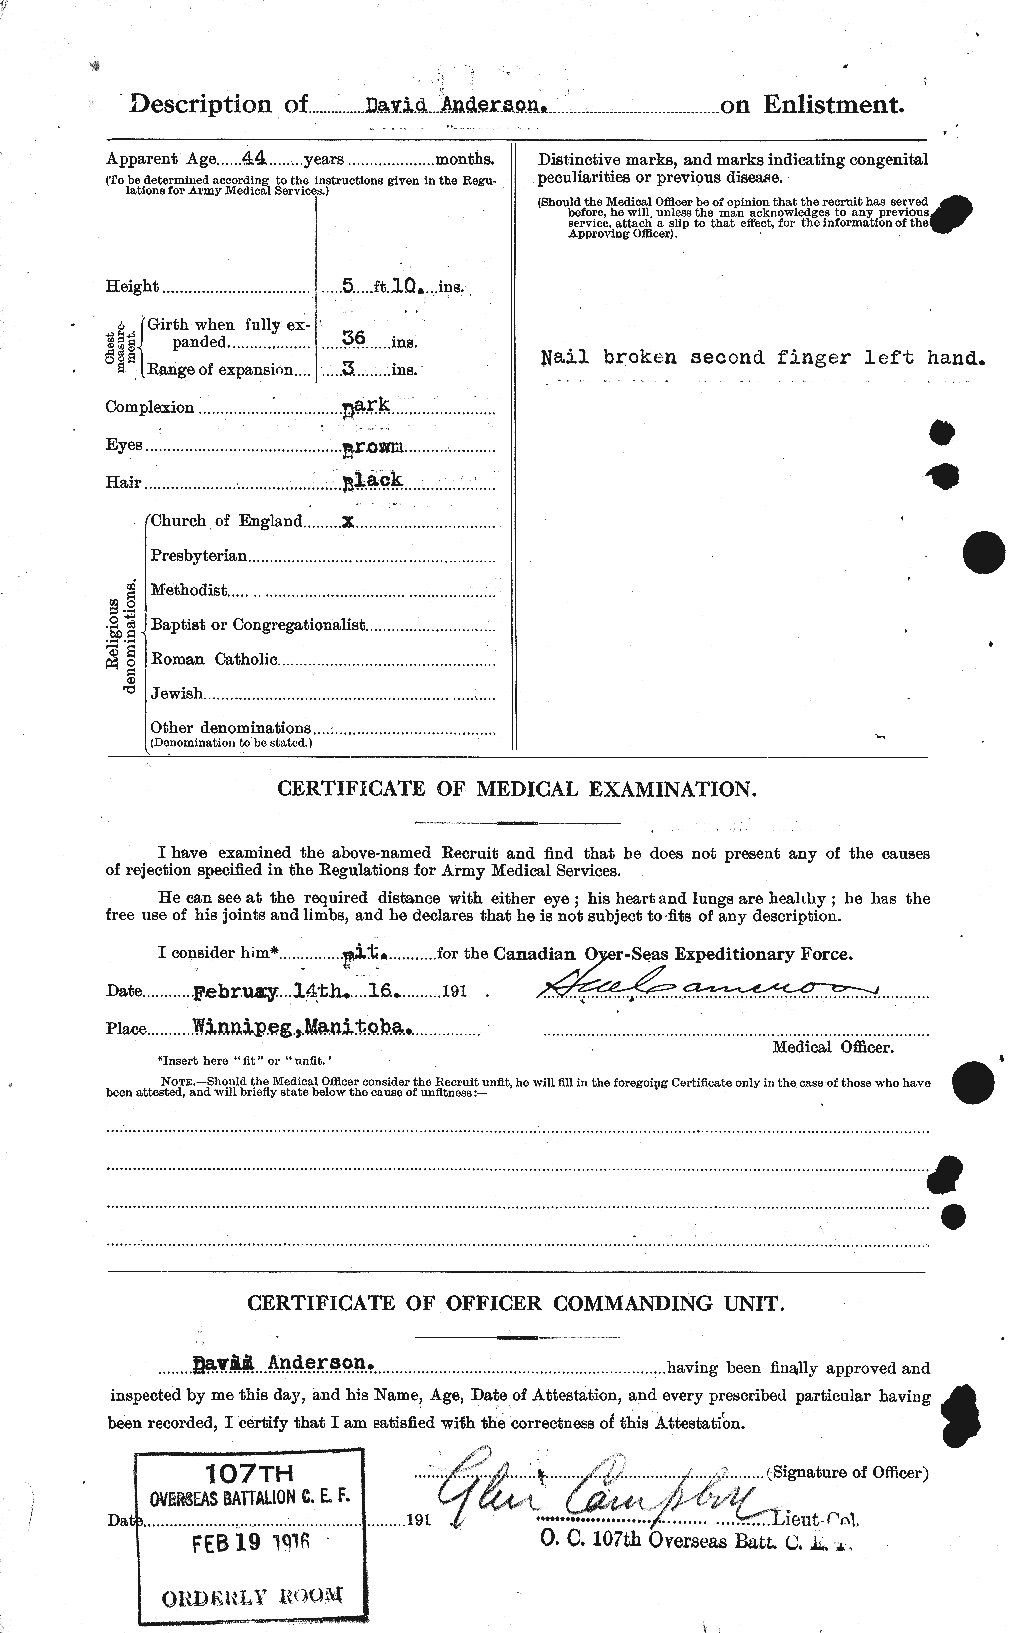 Personnel Records of the First World War - CEF 210021b